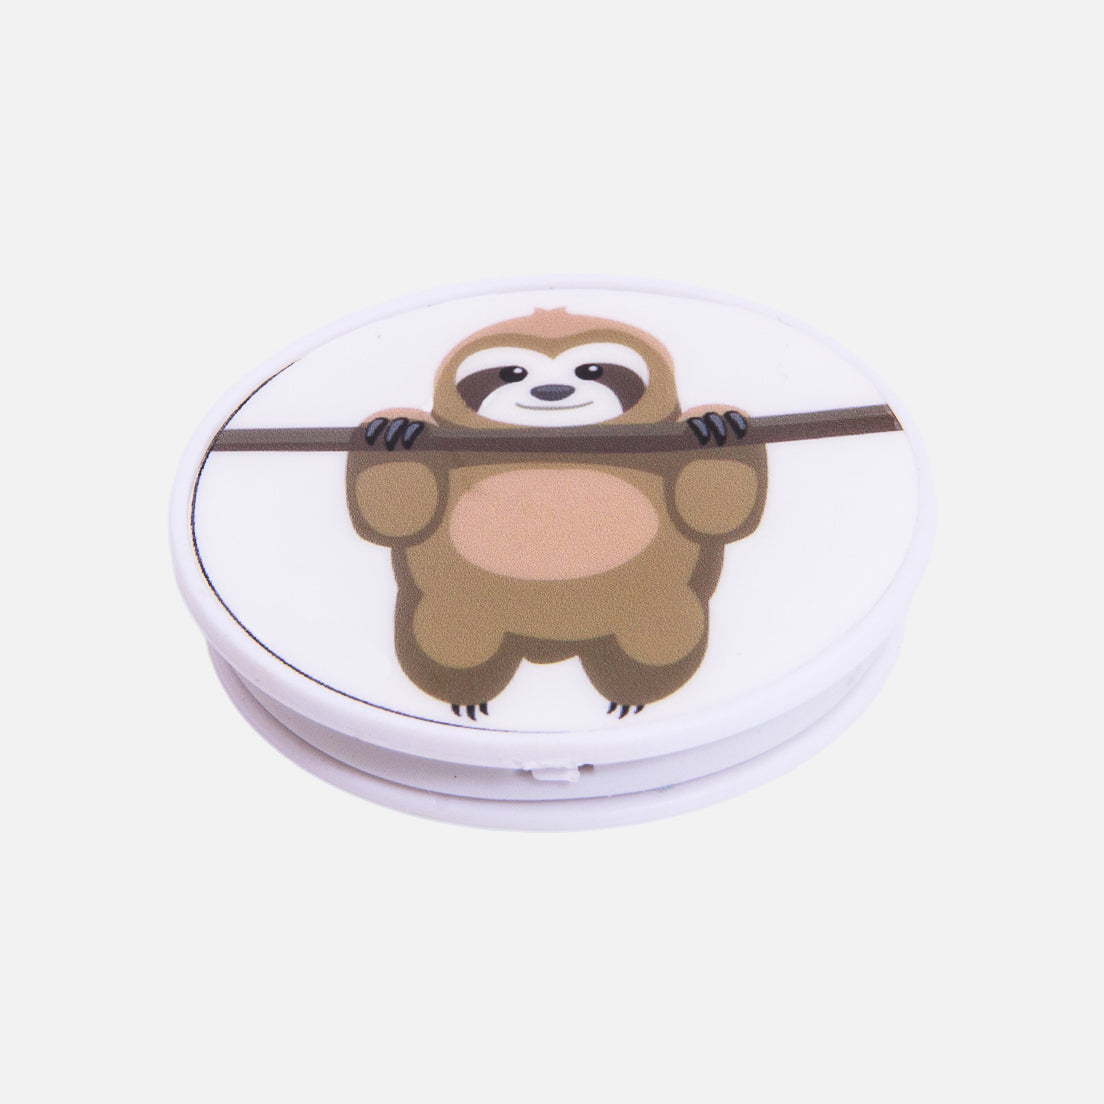 Sloth perched on a branch print smartphone stand and grip